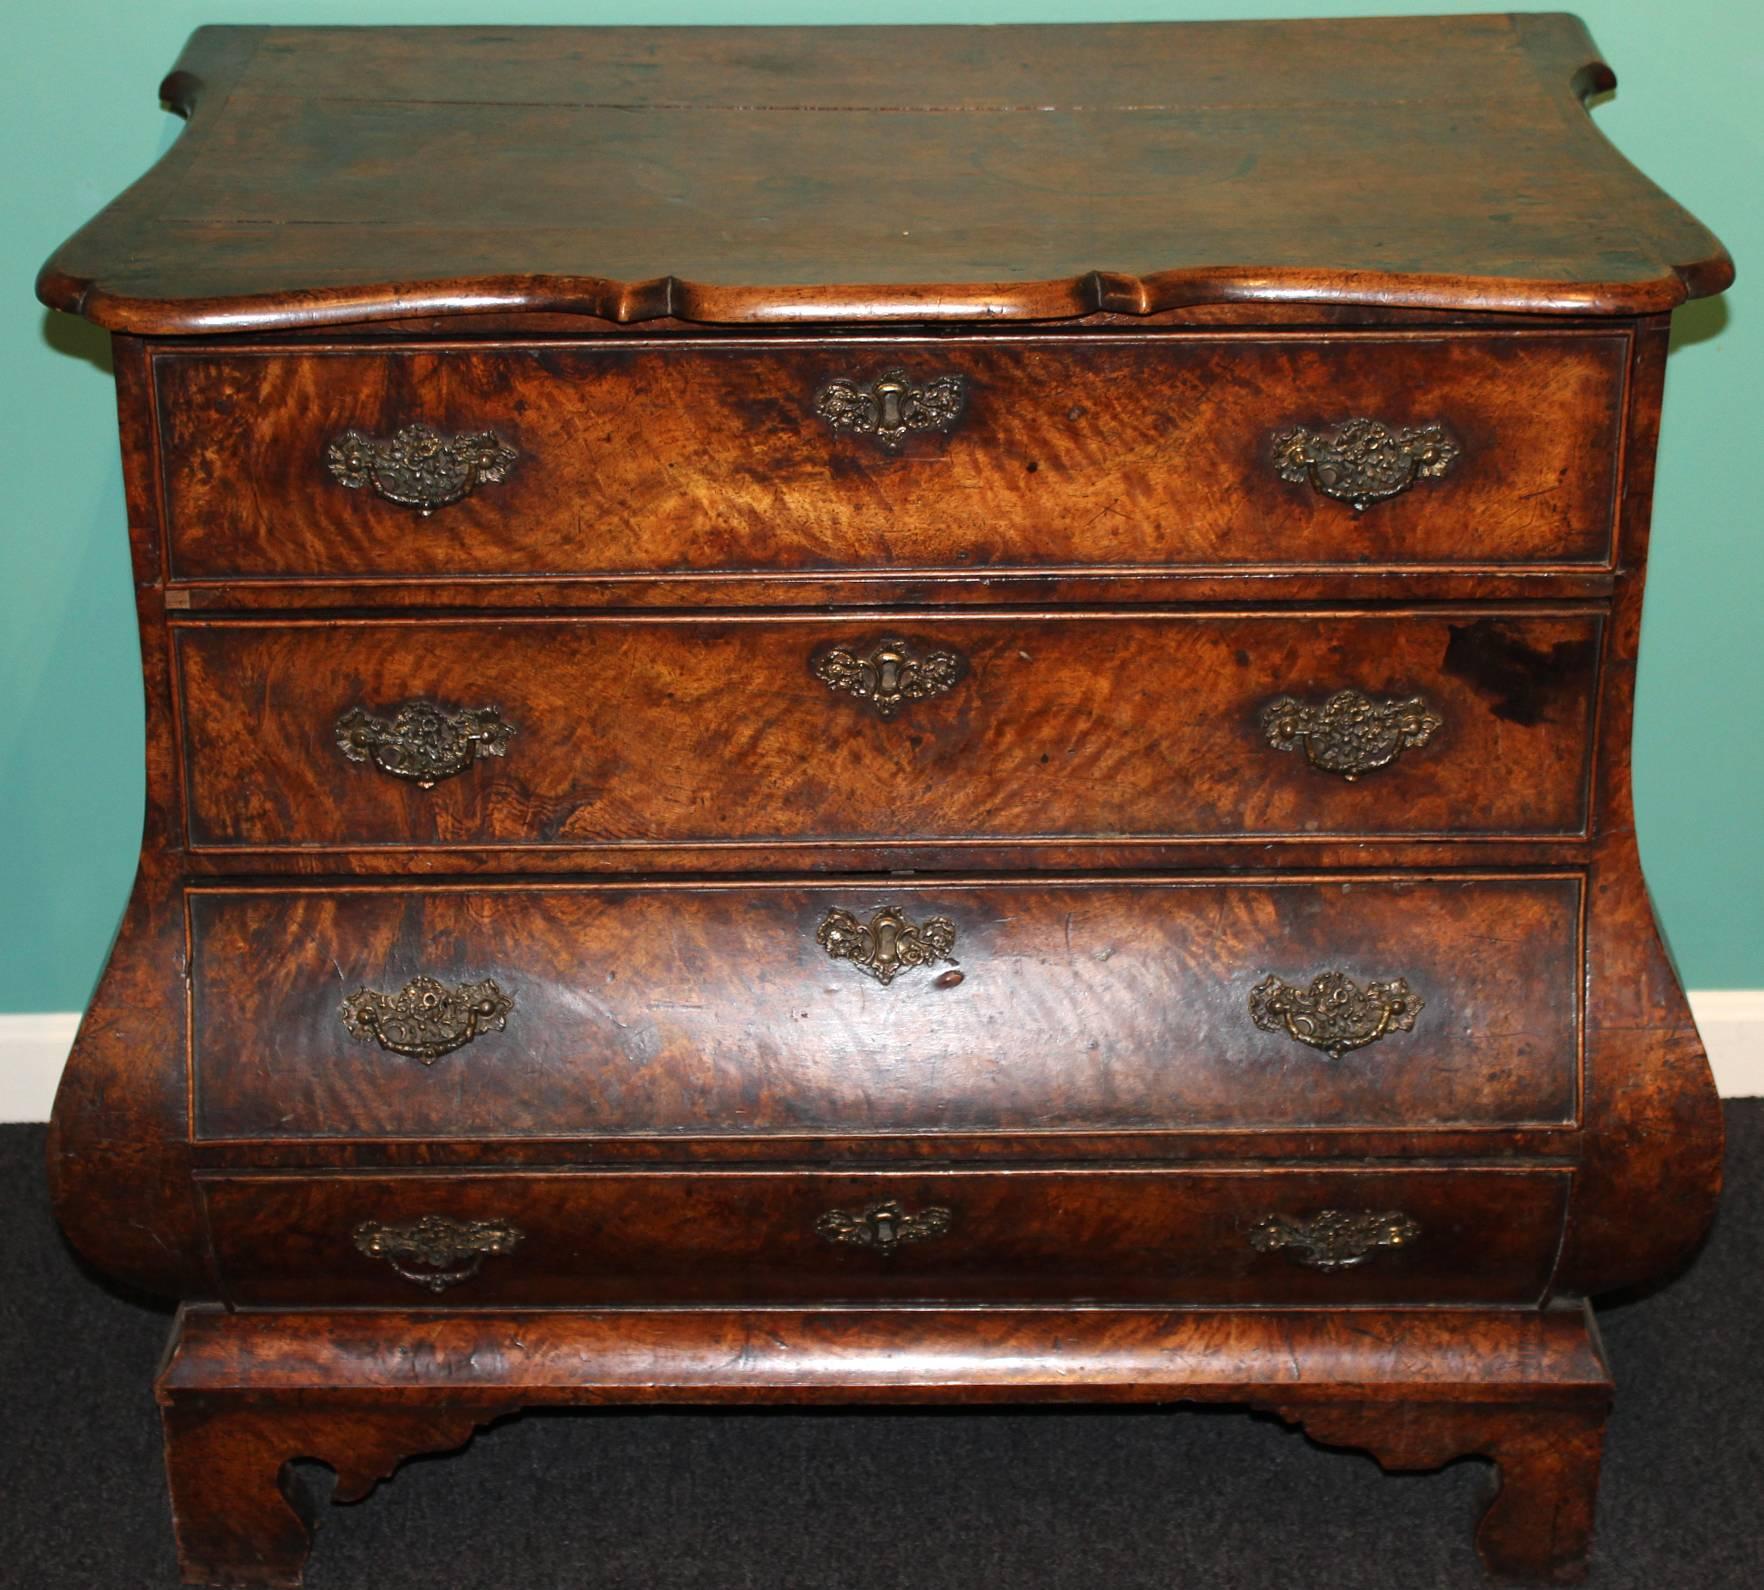 A diminutive Dutch or German bombe oak and walnut four drawer chest. The nicely shaped and moulded top above a case of four drawers with swelled, or bombe, lower section and all raised by four bracket feet. Overall nice patina and color with great